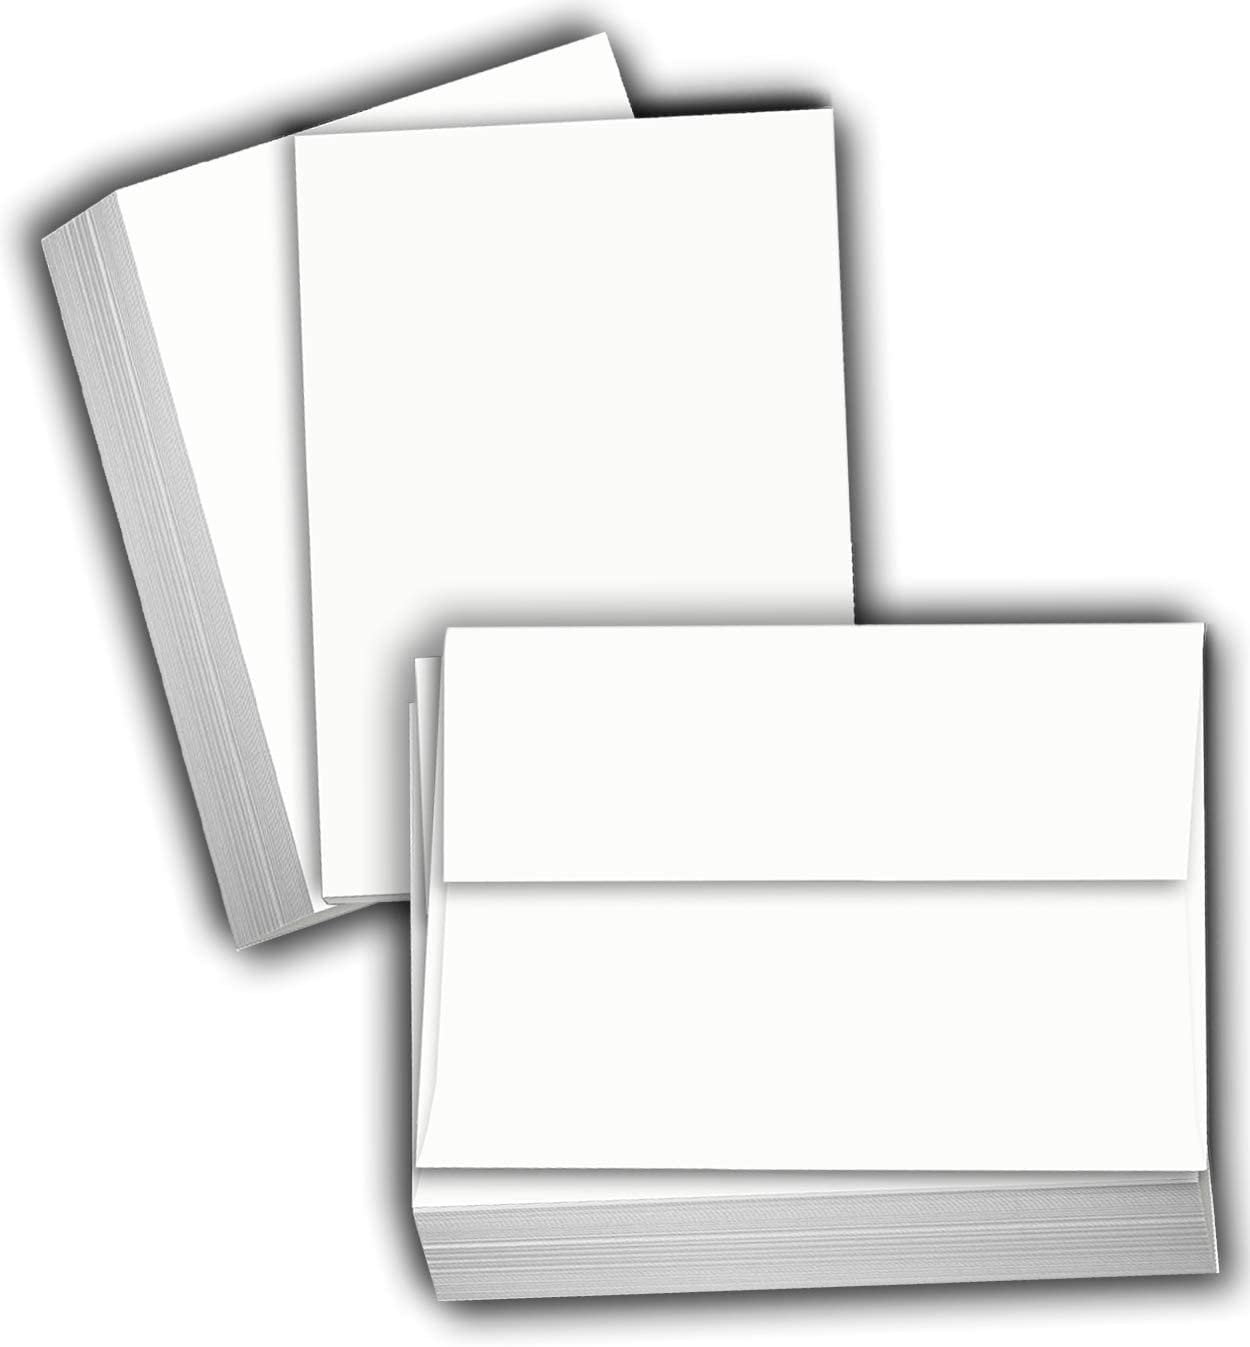 Set of 8 California Stationery Folded Note Cards